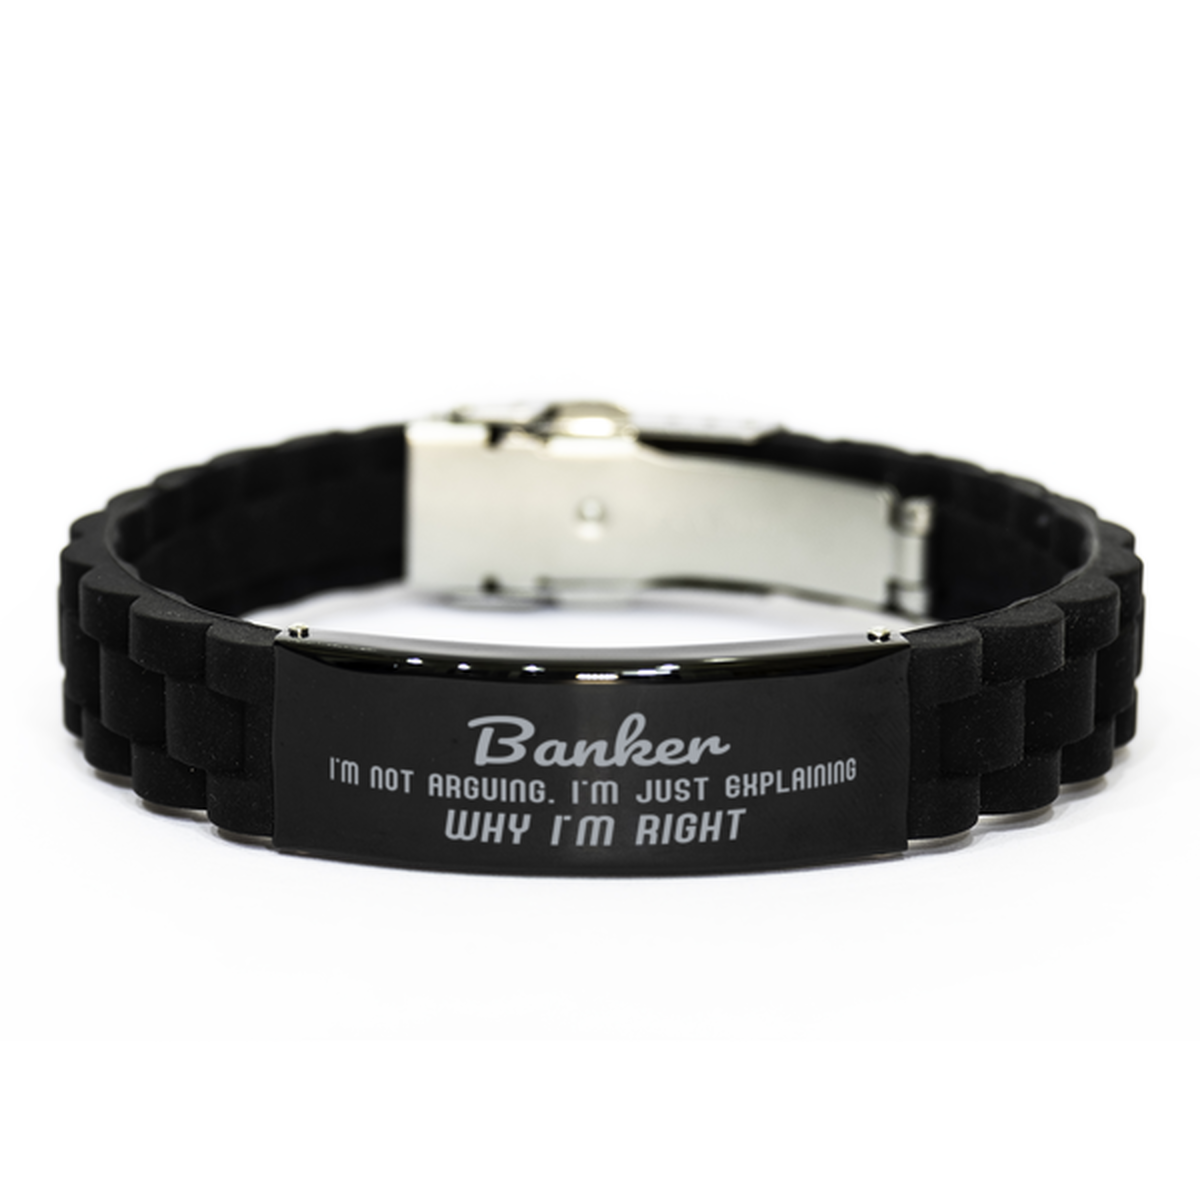 Banker I'm not Arguing. I'm Just Explaining Why I'm RIGHT Black Glidelock Clasp Bracelet, Funny Saying Quote Banker Gifts For Banker Graduation Birthday Christmas Gifts for Men Women Coworker